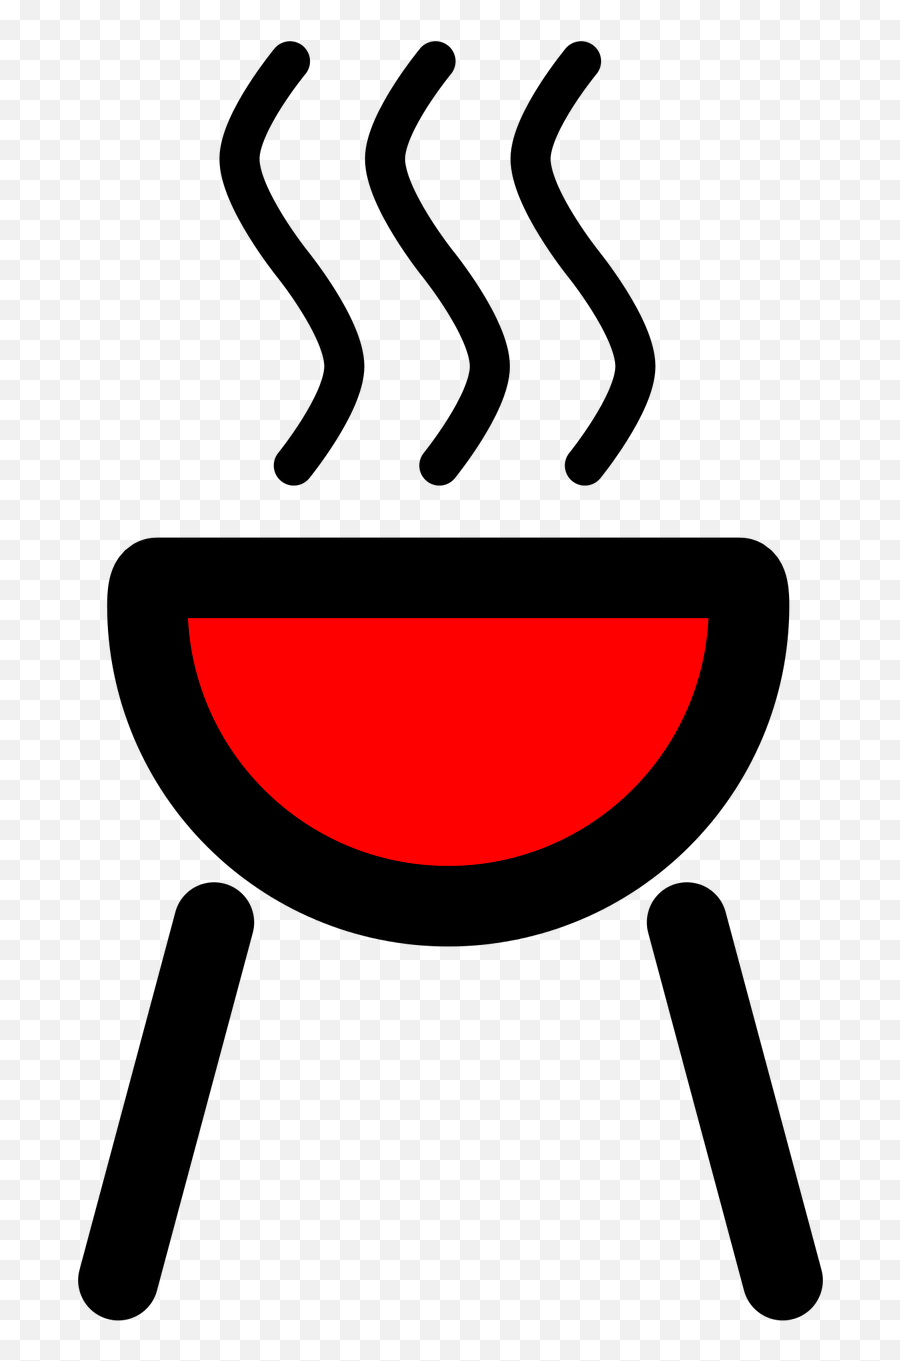 Grill Barbeque Bbq - Free Vector Graphic On Pixabay Vector Panggangan Png,Electrolux Icon Bbq